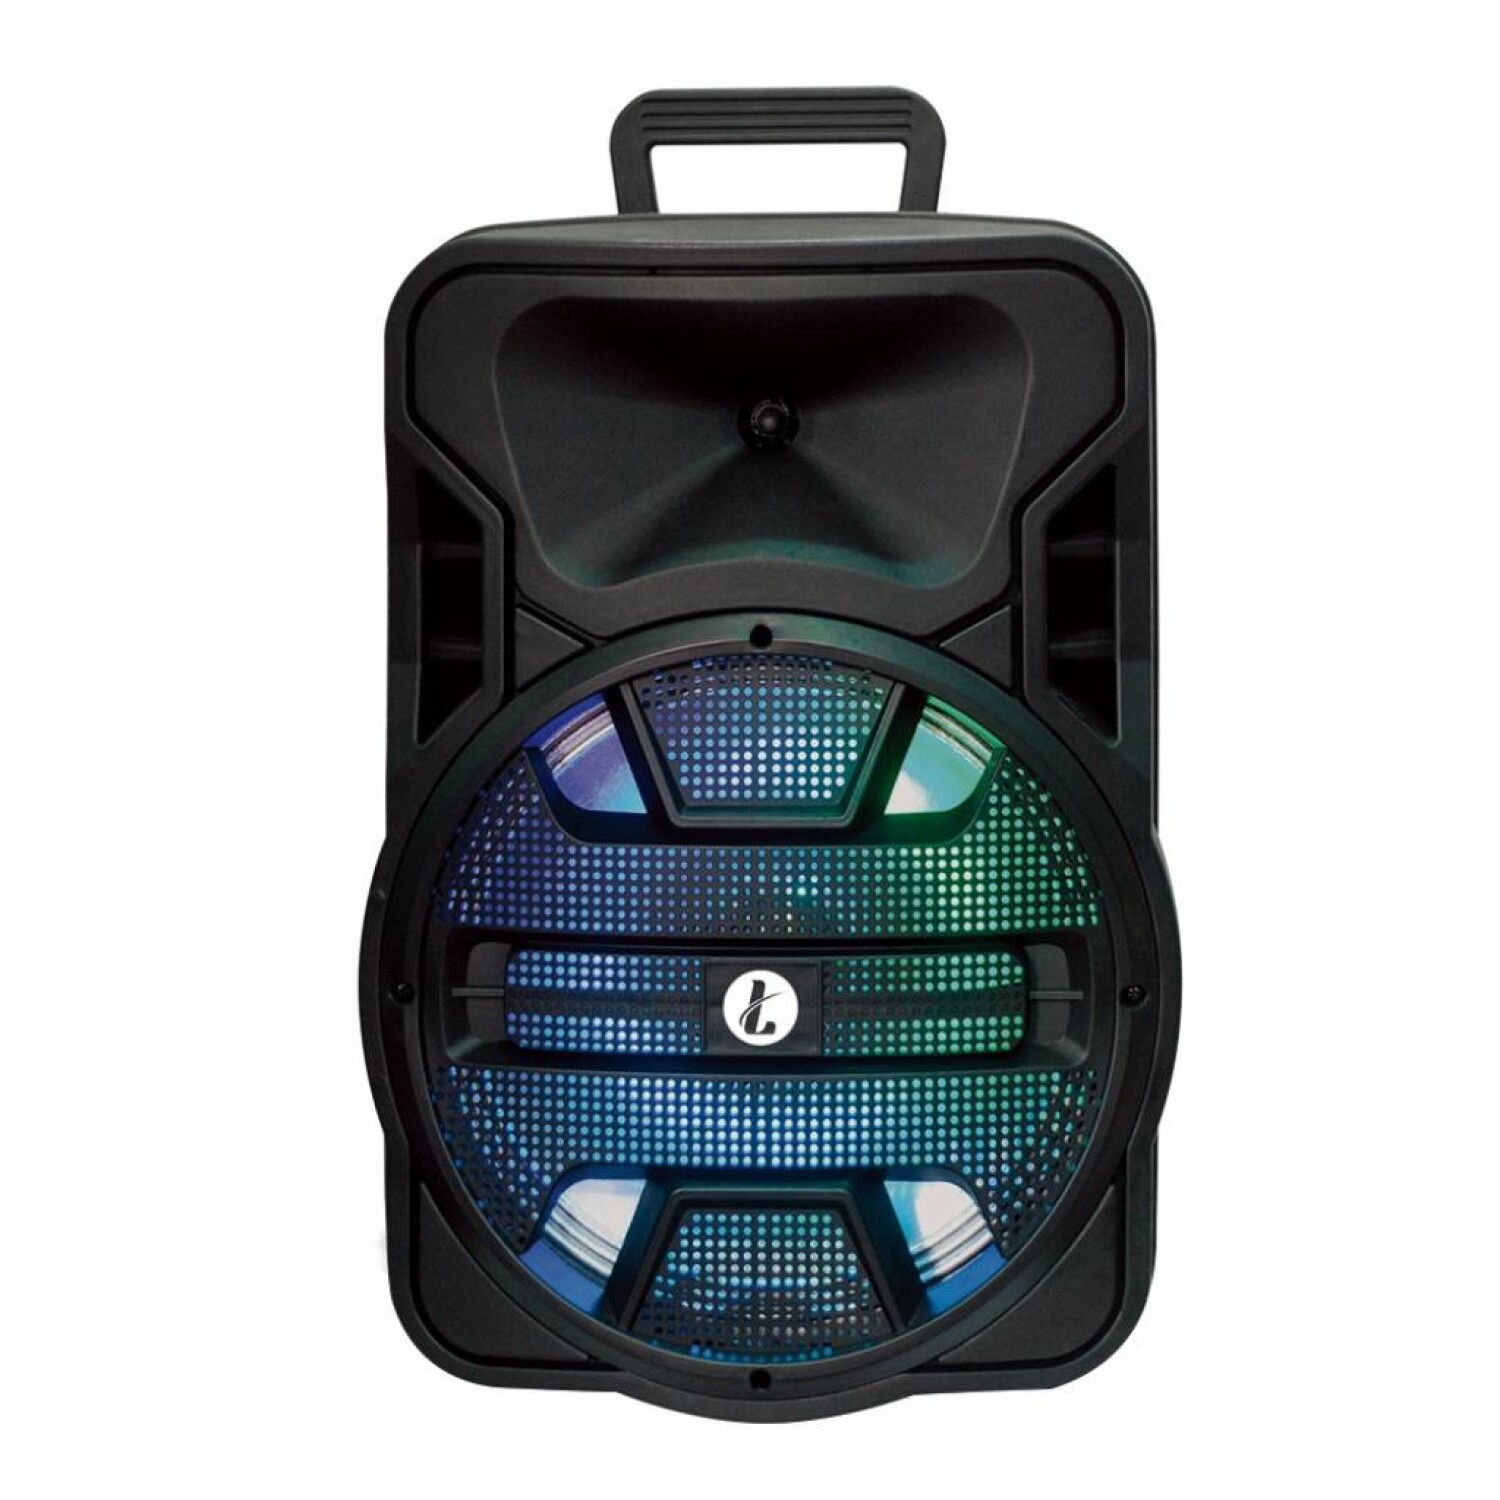 Aiwa parlante torre 1000w bluetooth luces rgb - AWPOH1D — Audio Total